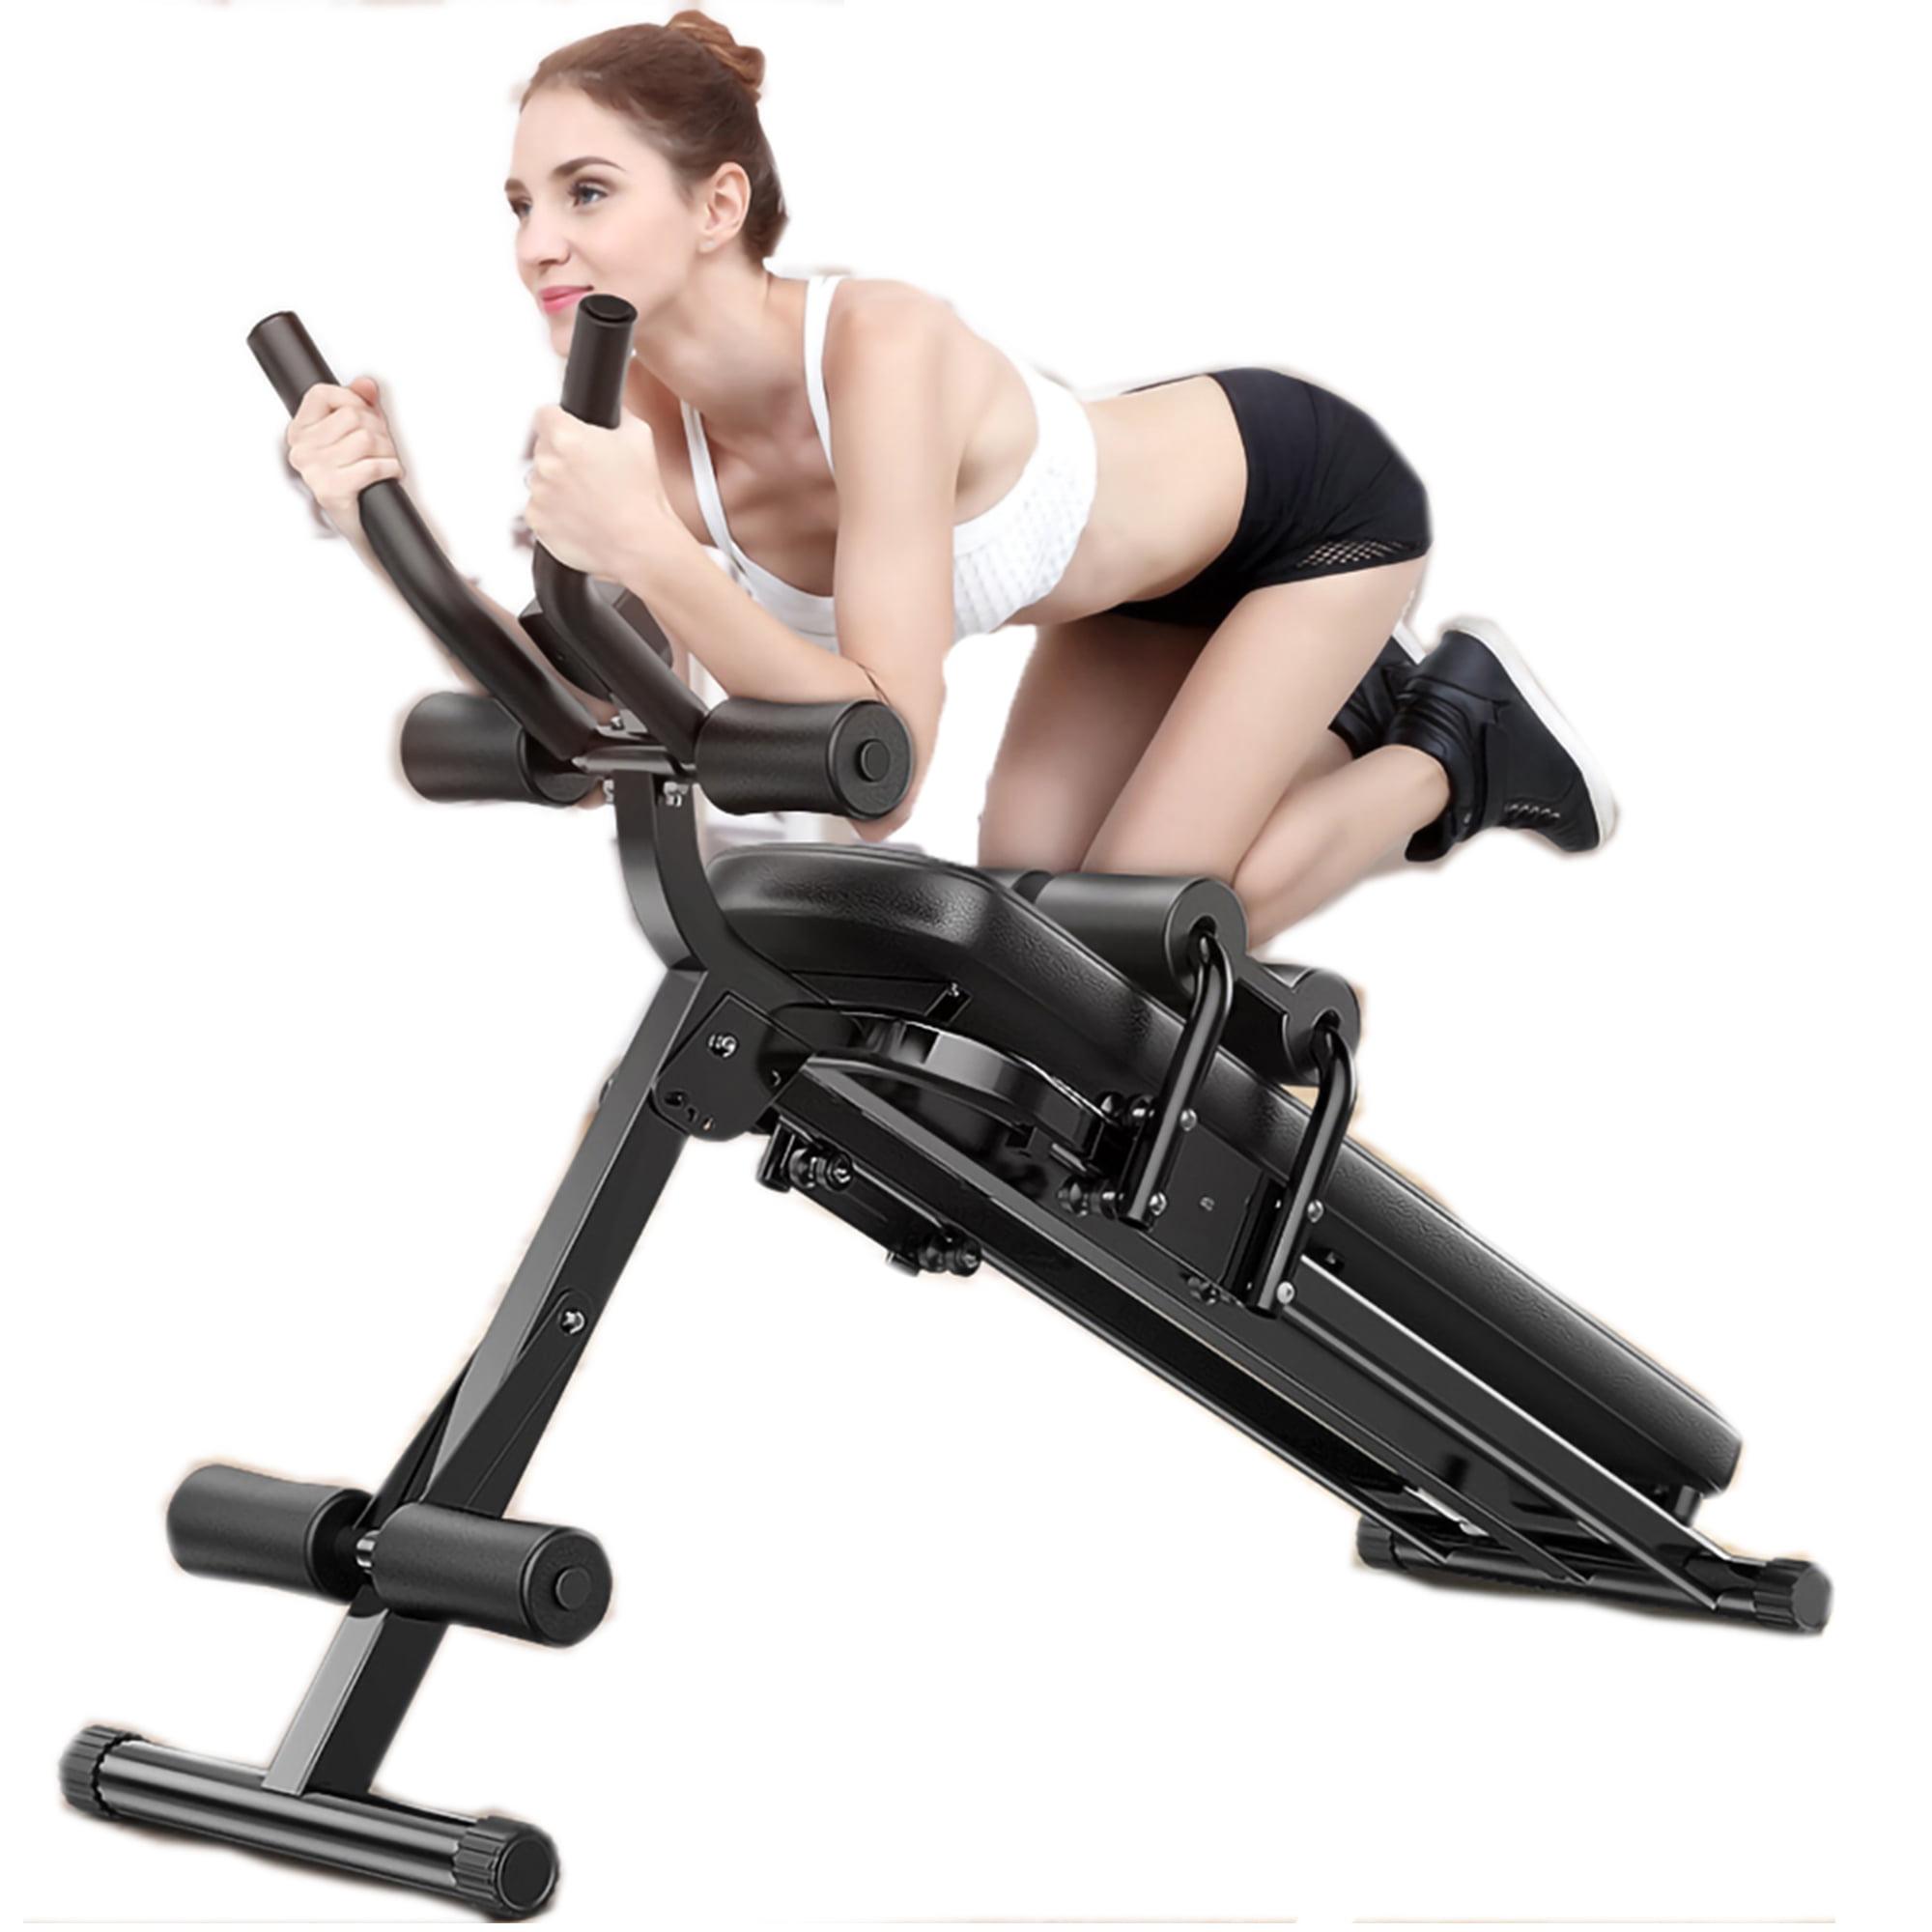 Home Exercise Equipment Gym For Abs Workout Machine Sit Up Fitness Health New 